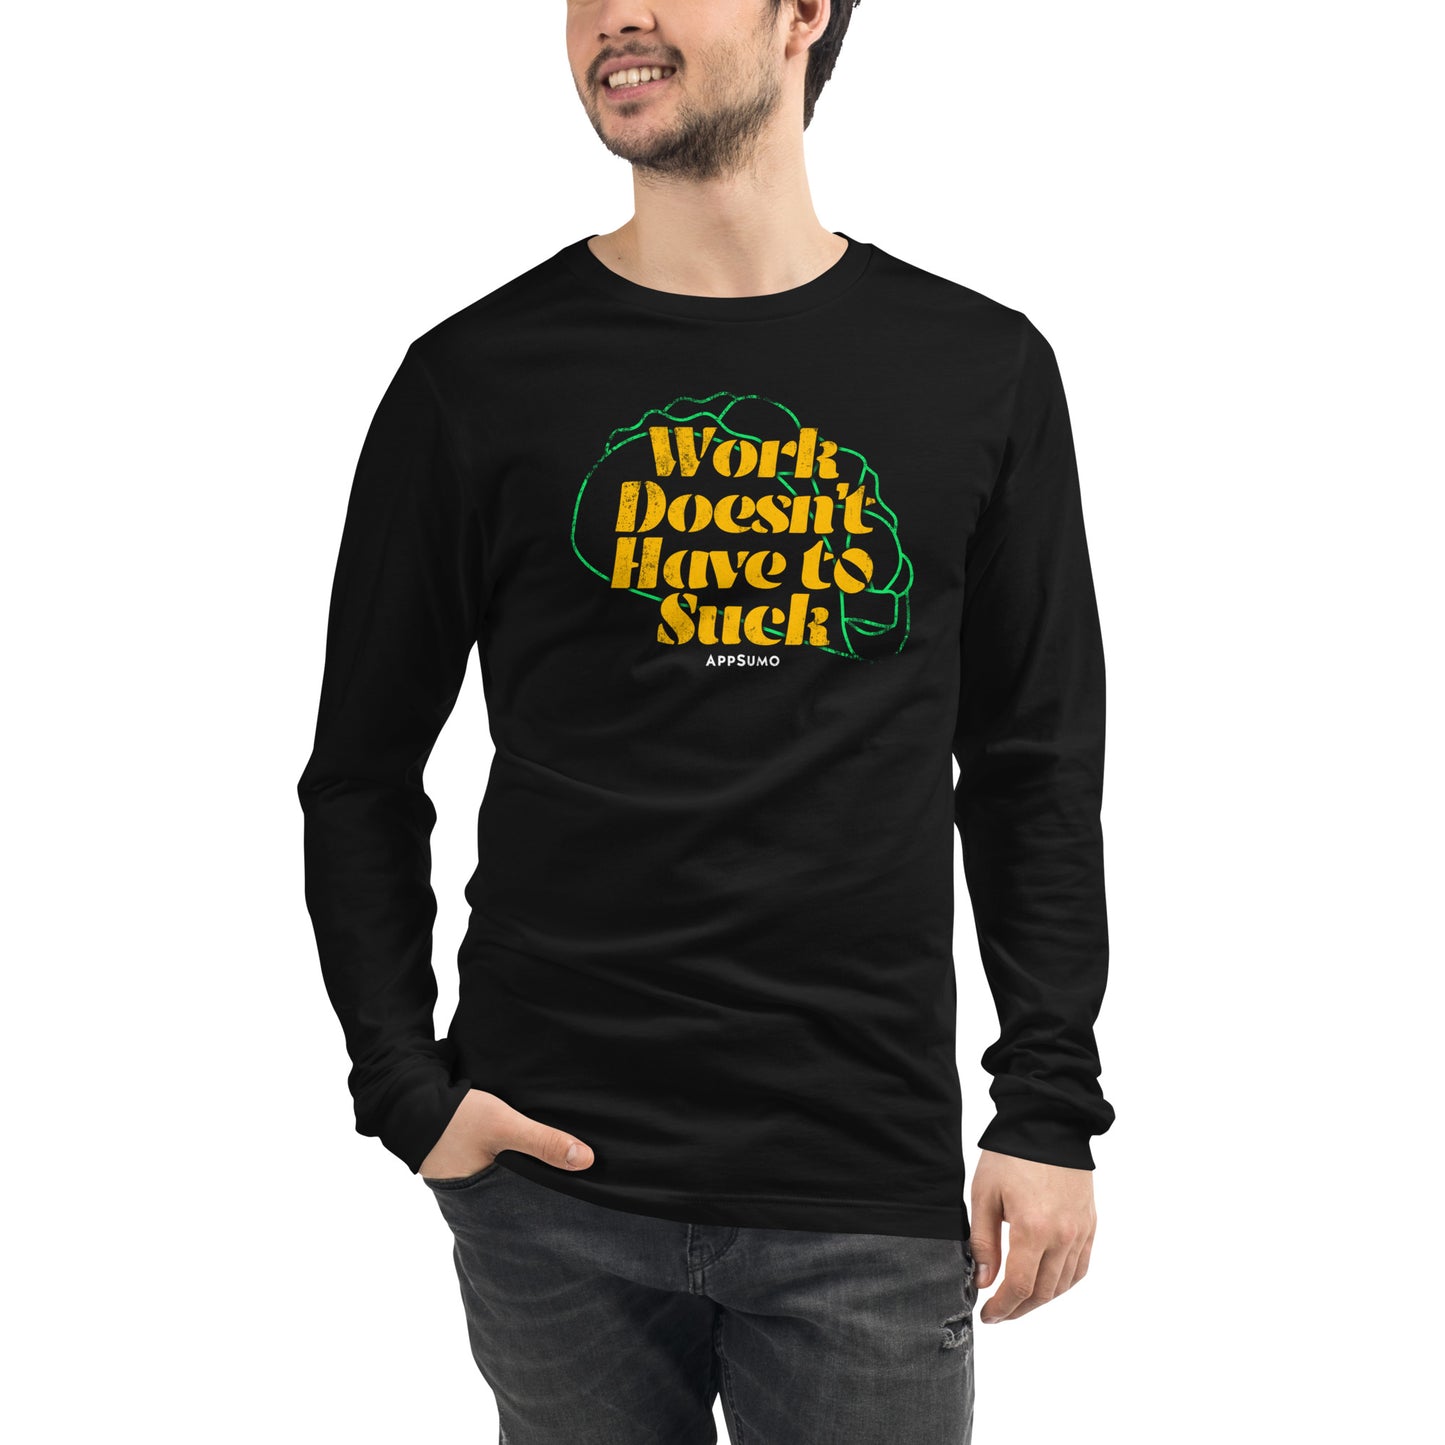 Work Doesn't Have to Suck - Unisex Long Sleeve Tee